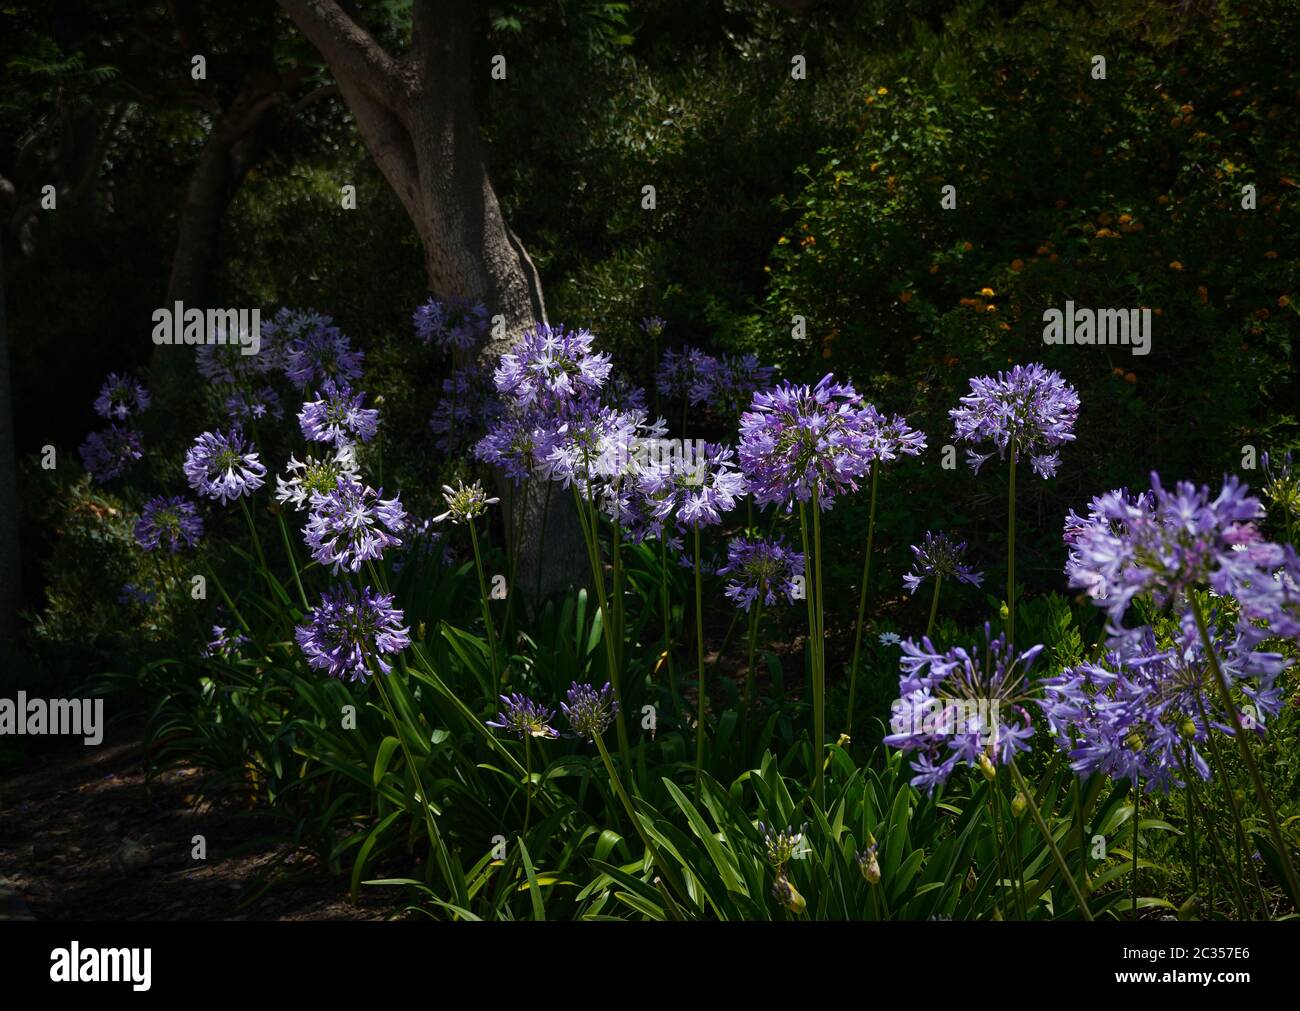 A bed planted with bright blue Agapanthus in bloom in the sunlight, with a tree that is providing dark shade and its trunk in back. Green foliage. Stock Photo